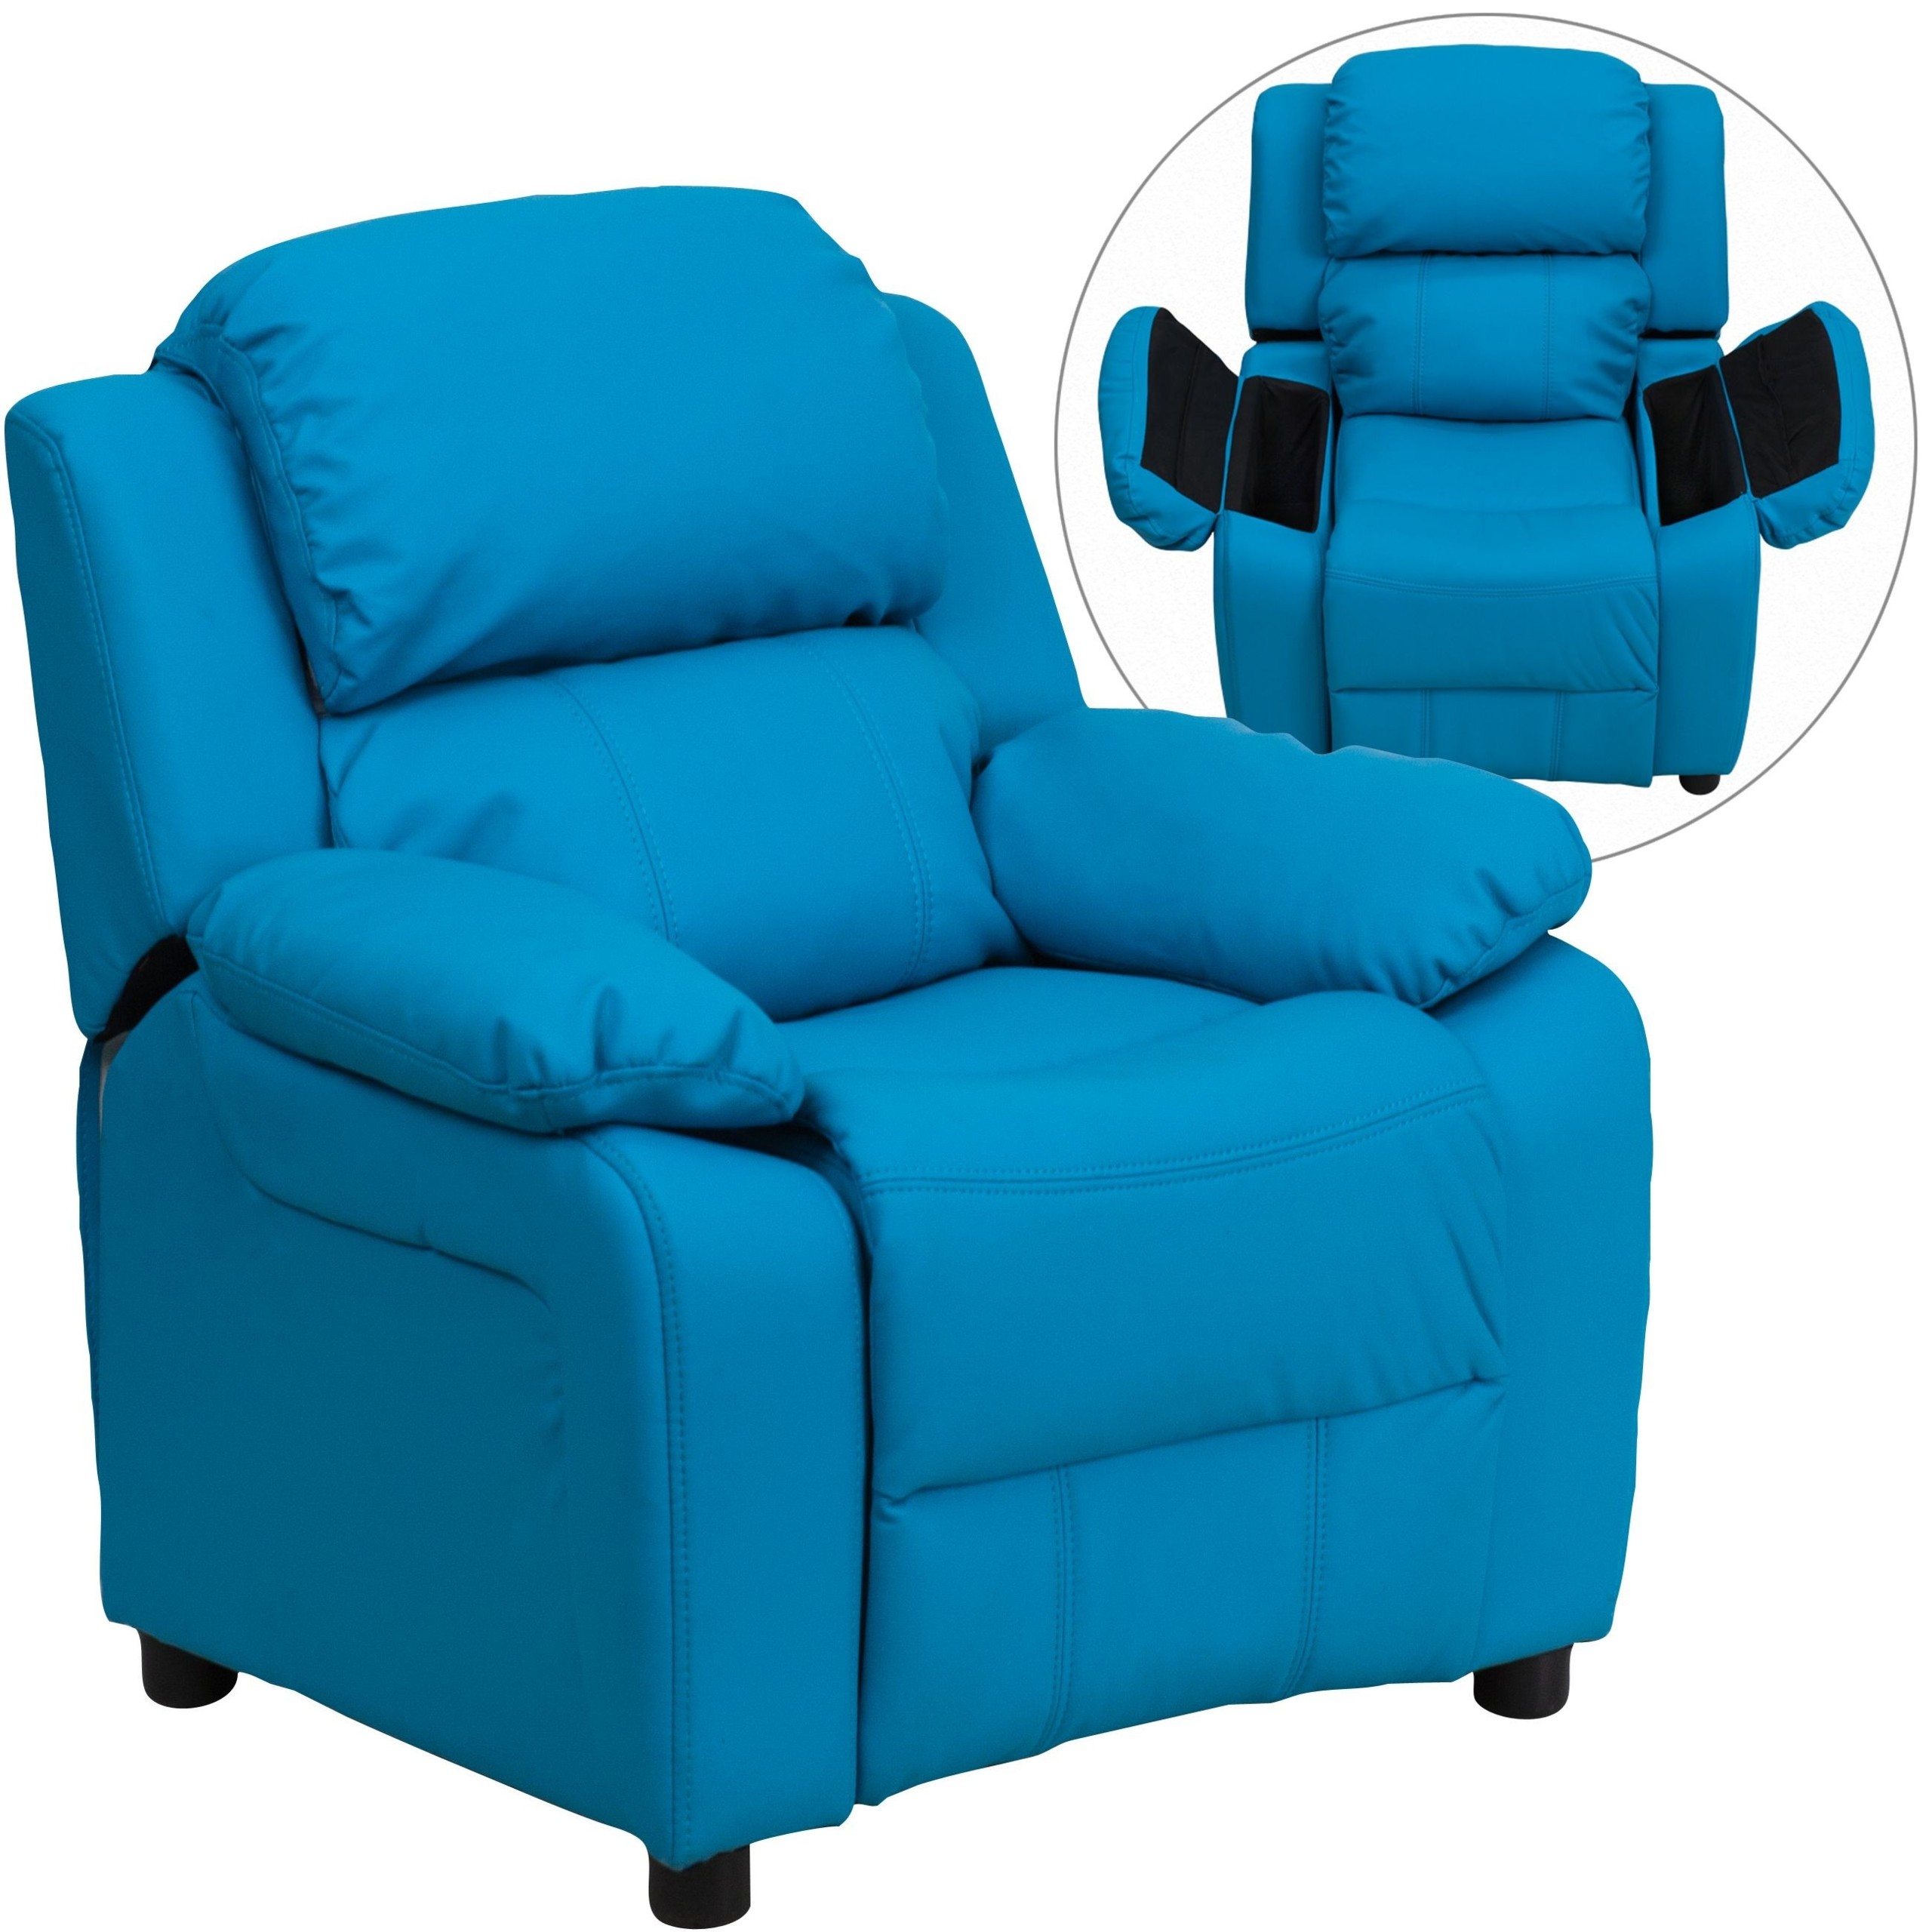 Recliner for short people